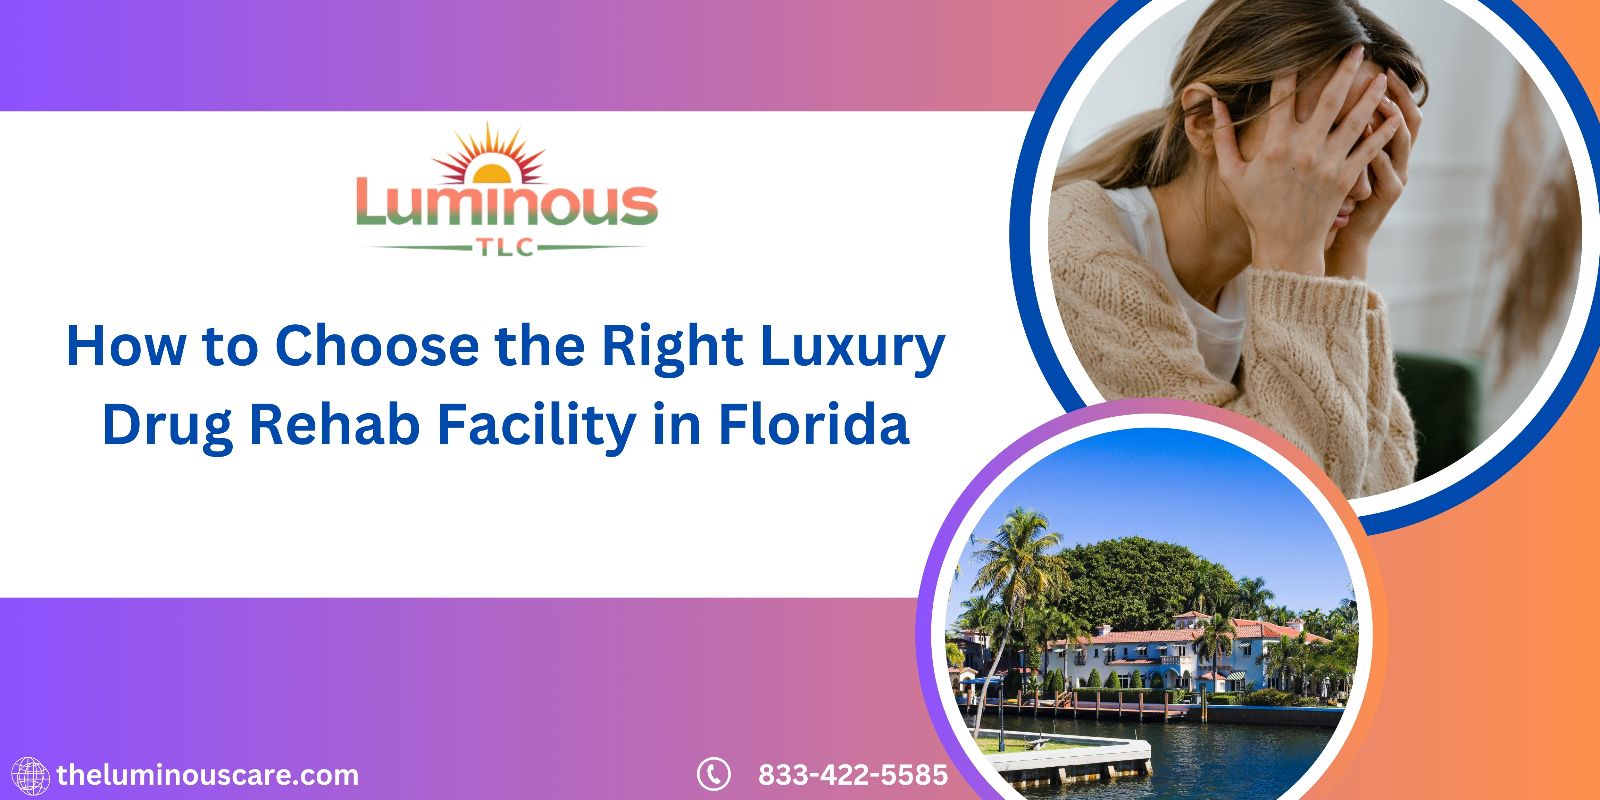 How to Choose the Right Luxury Drug Rehab Facility in Florida